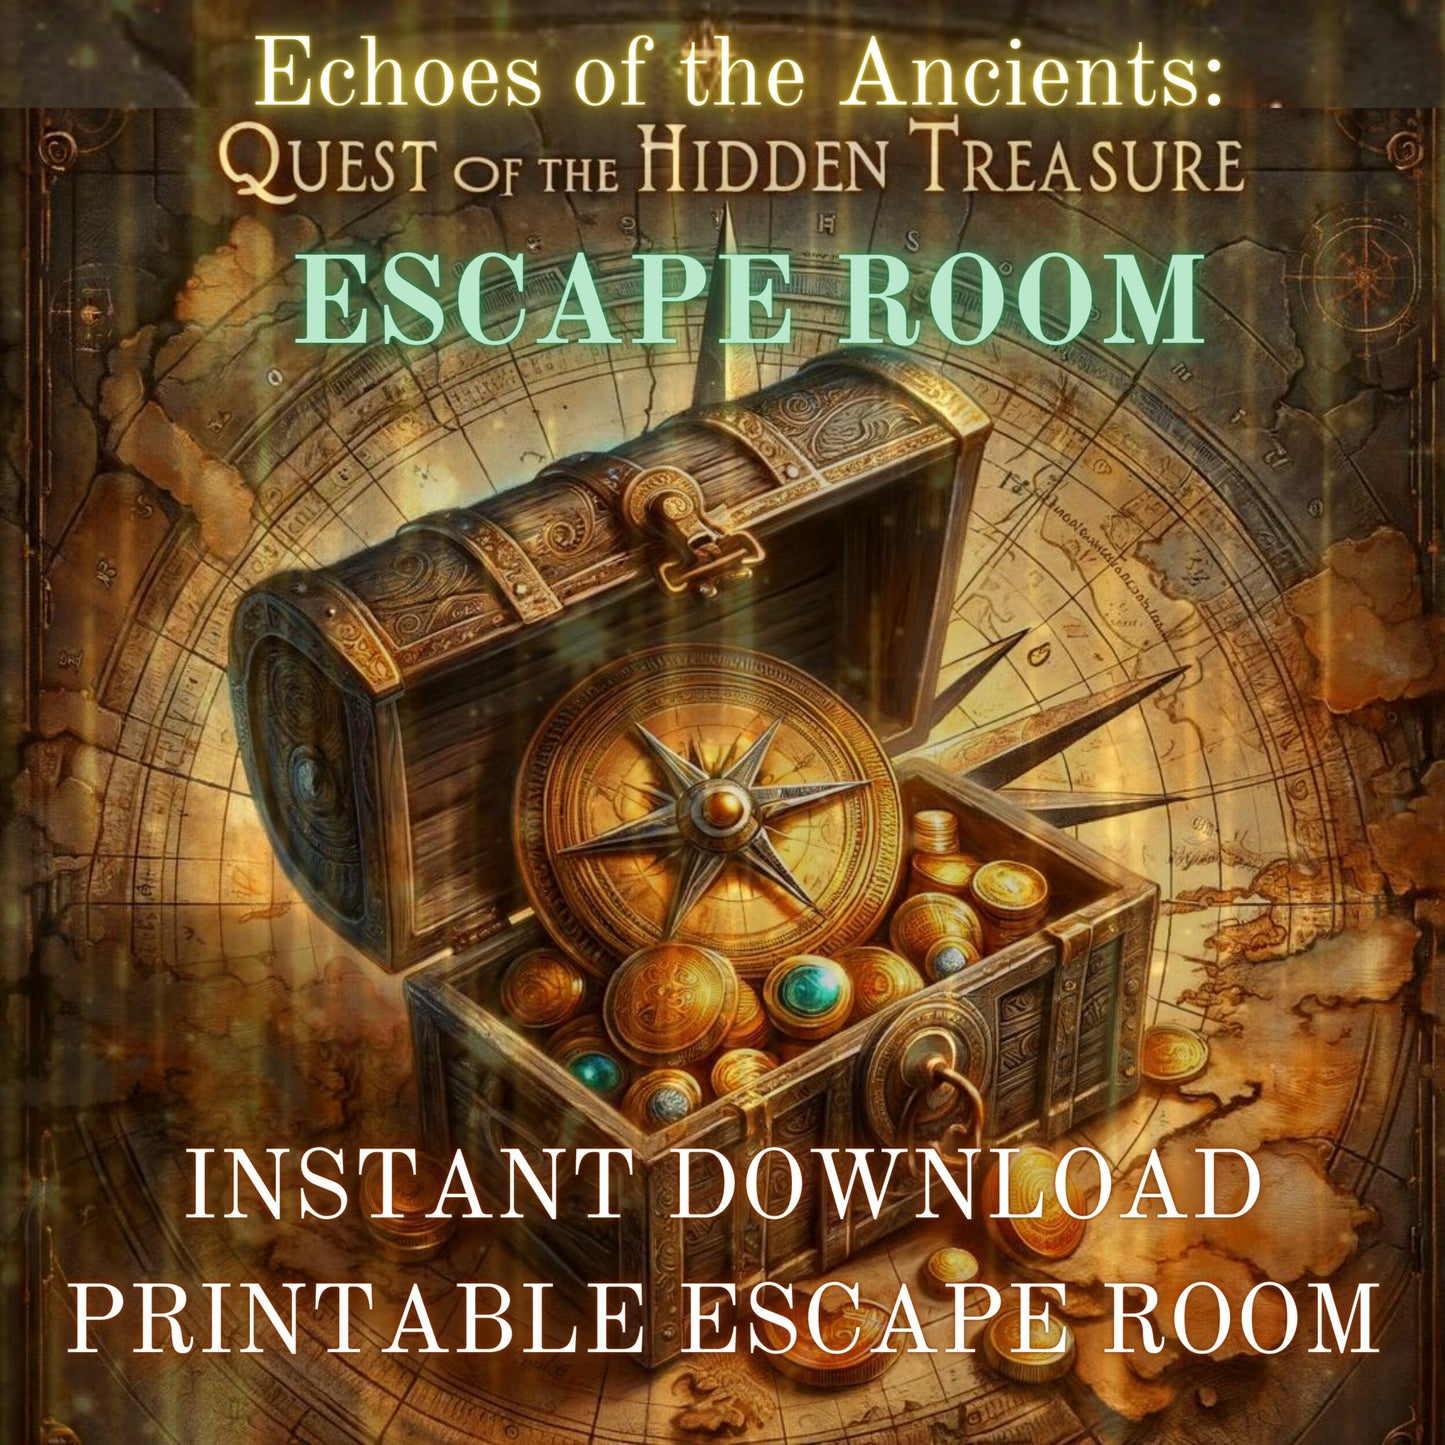 Echoes of the Ancients: Quest for the Hidden Treasure Mini Escape Room Game Free Trail Mini Escape room Treasure Hunt Escape Room for Family